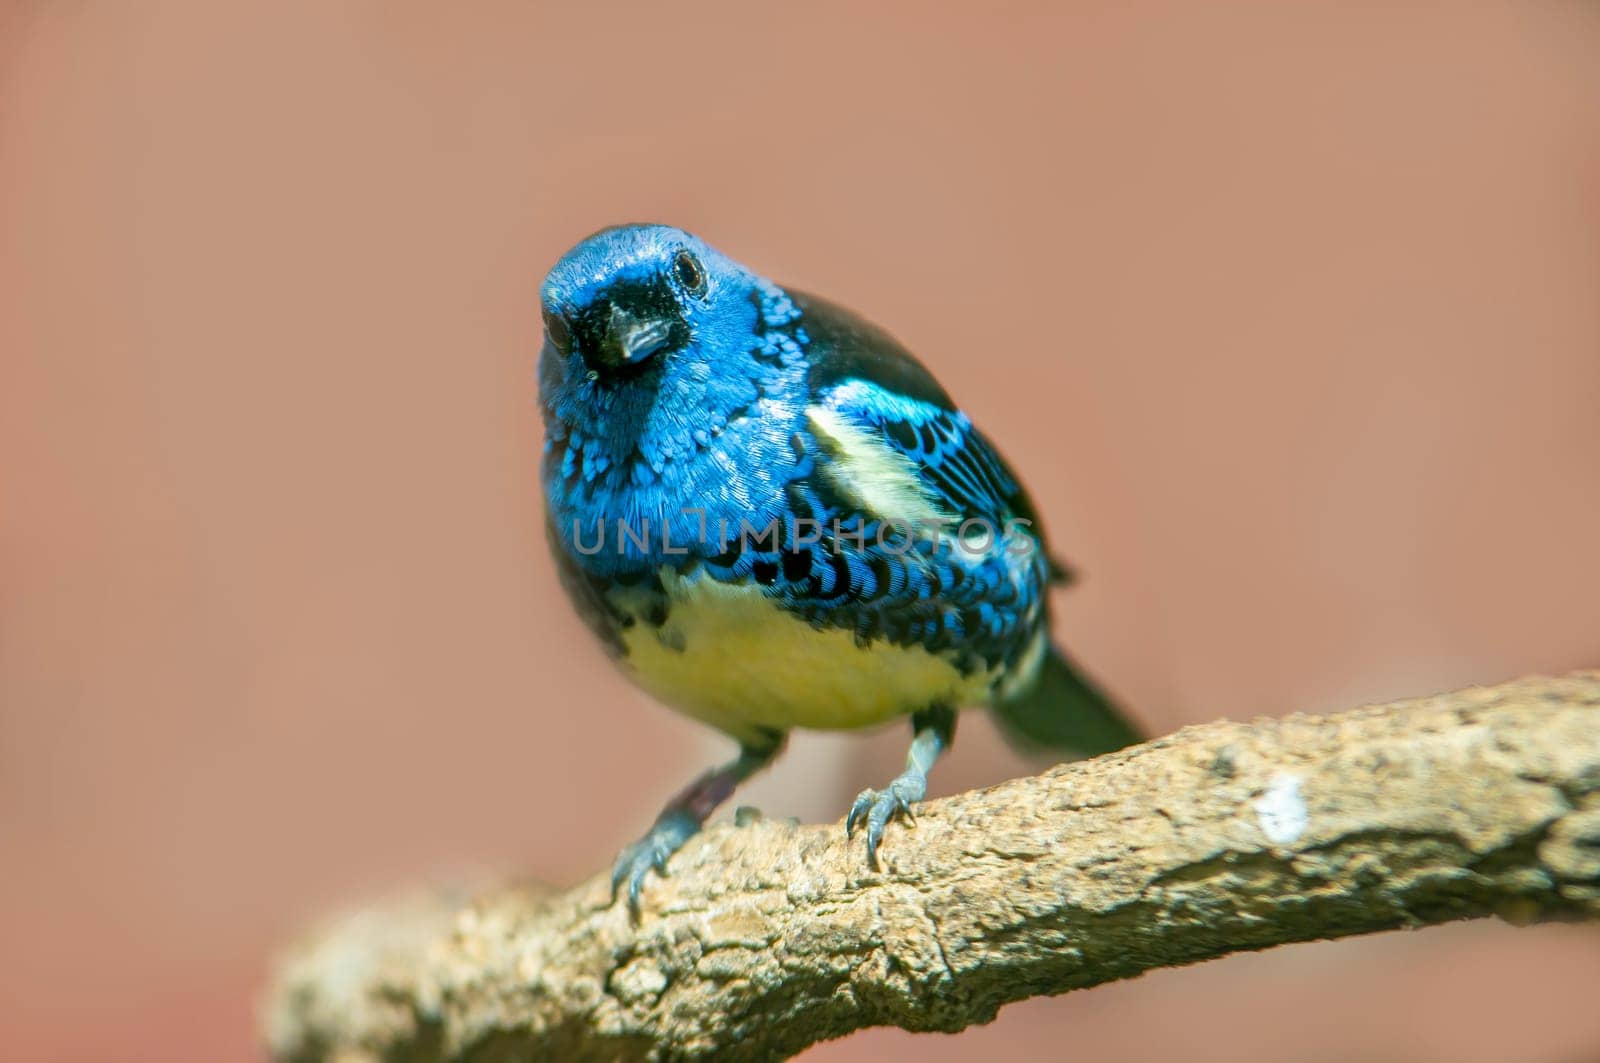 turquoise tanager sits on a branch in the sun